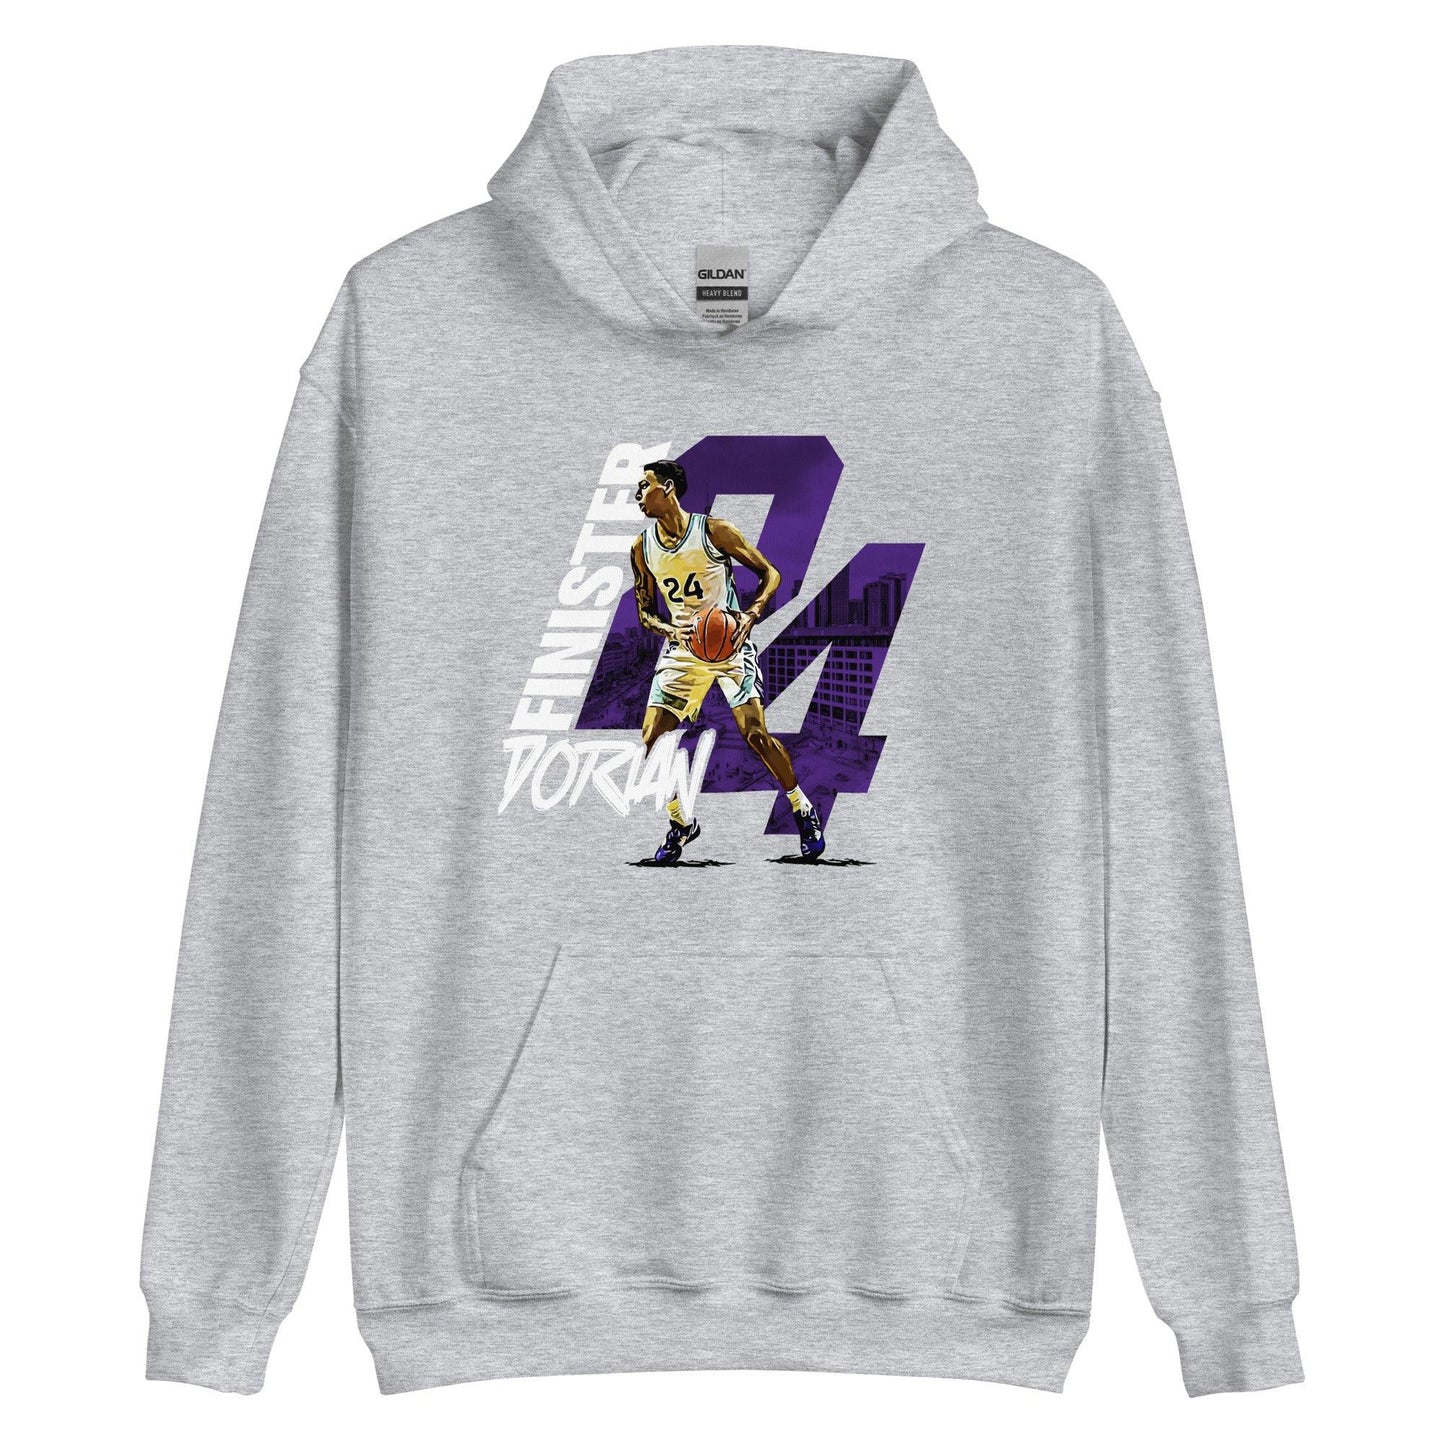 Dorian Finister "Gameday" Hoodie - Fan Arch